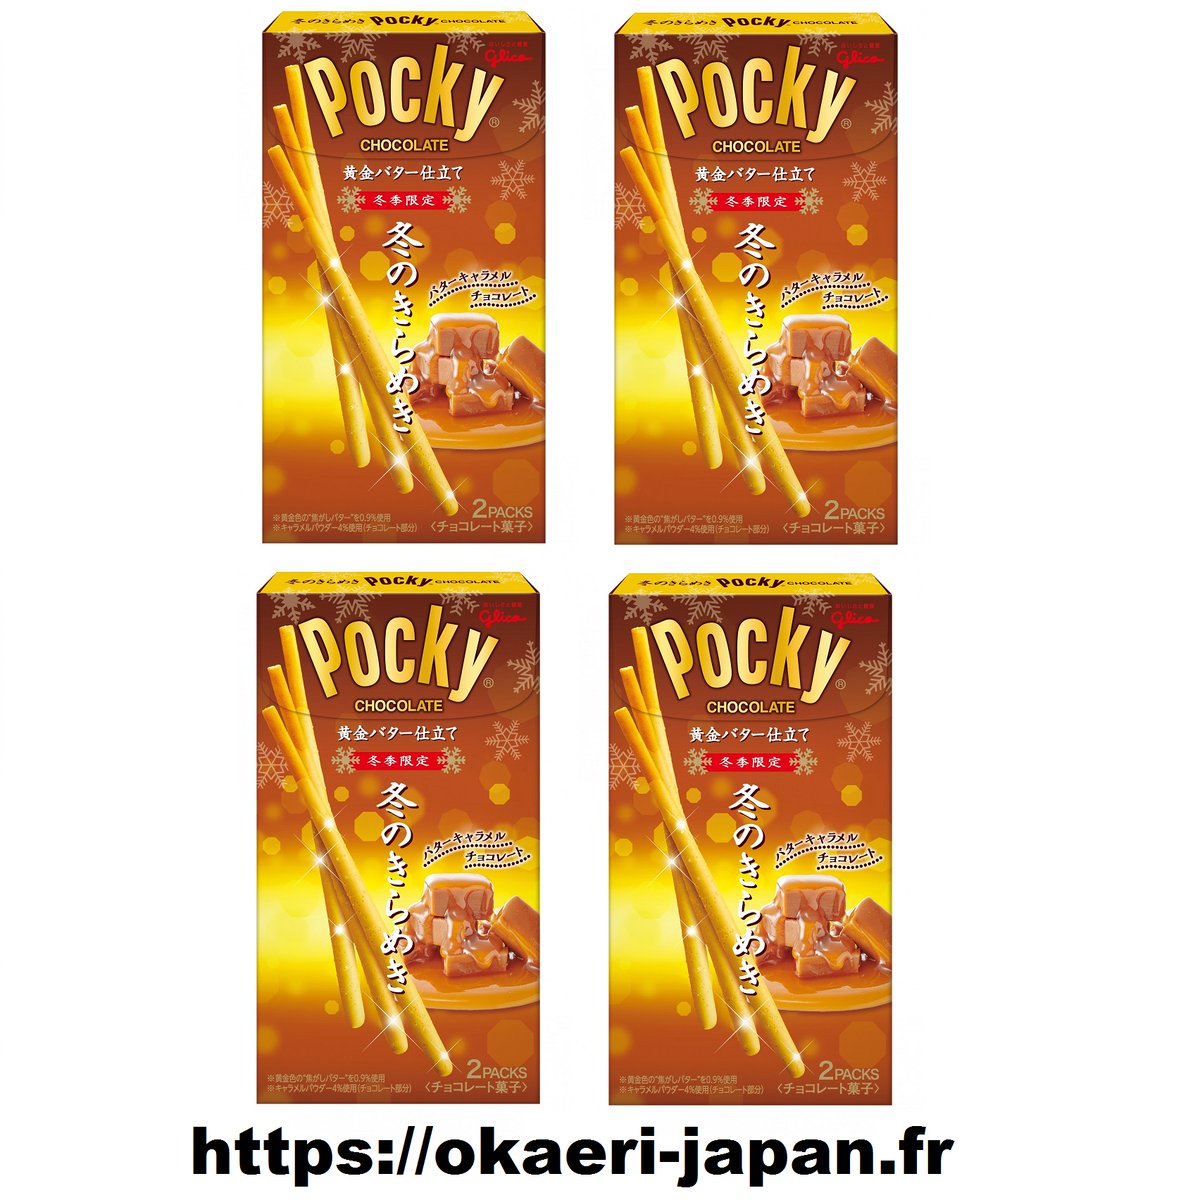 Glico Pocky Caramel Butter WINTER LIMITED 70g 4x big pack set SHIPPED is available https://t.co/